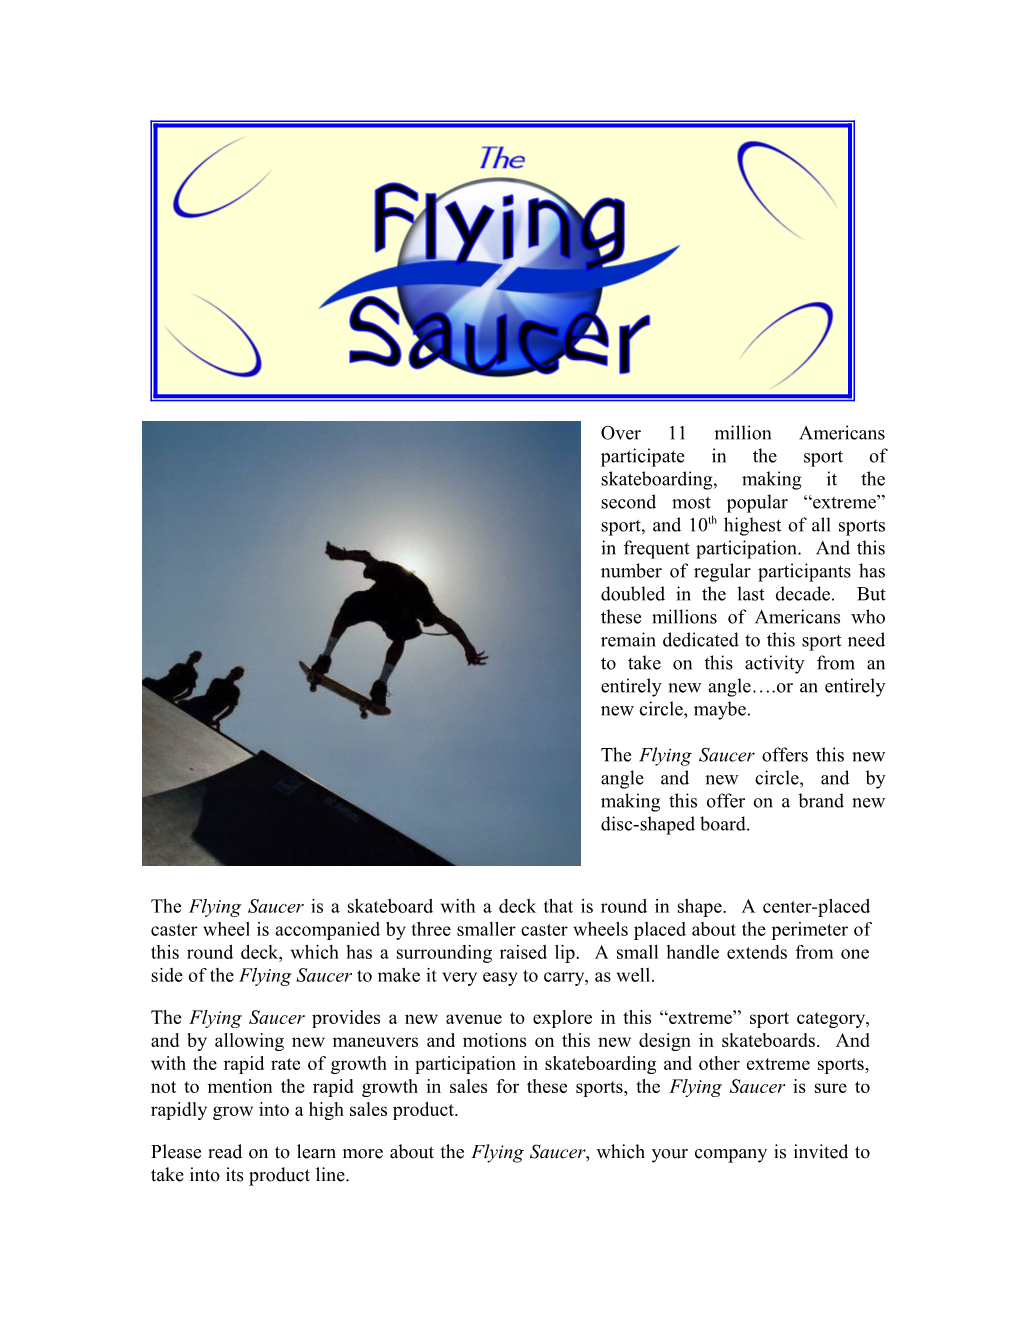 The Flying Saucer Provides a New Avenue to Explore in This Extreme Sport Category, And